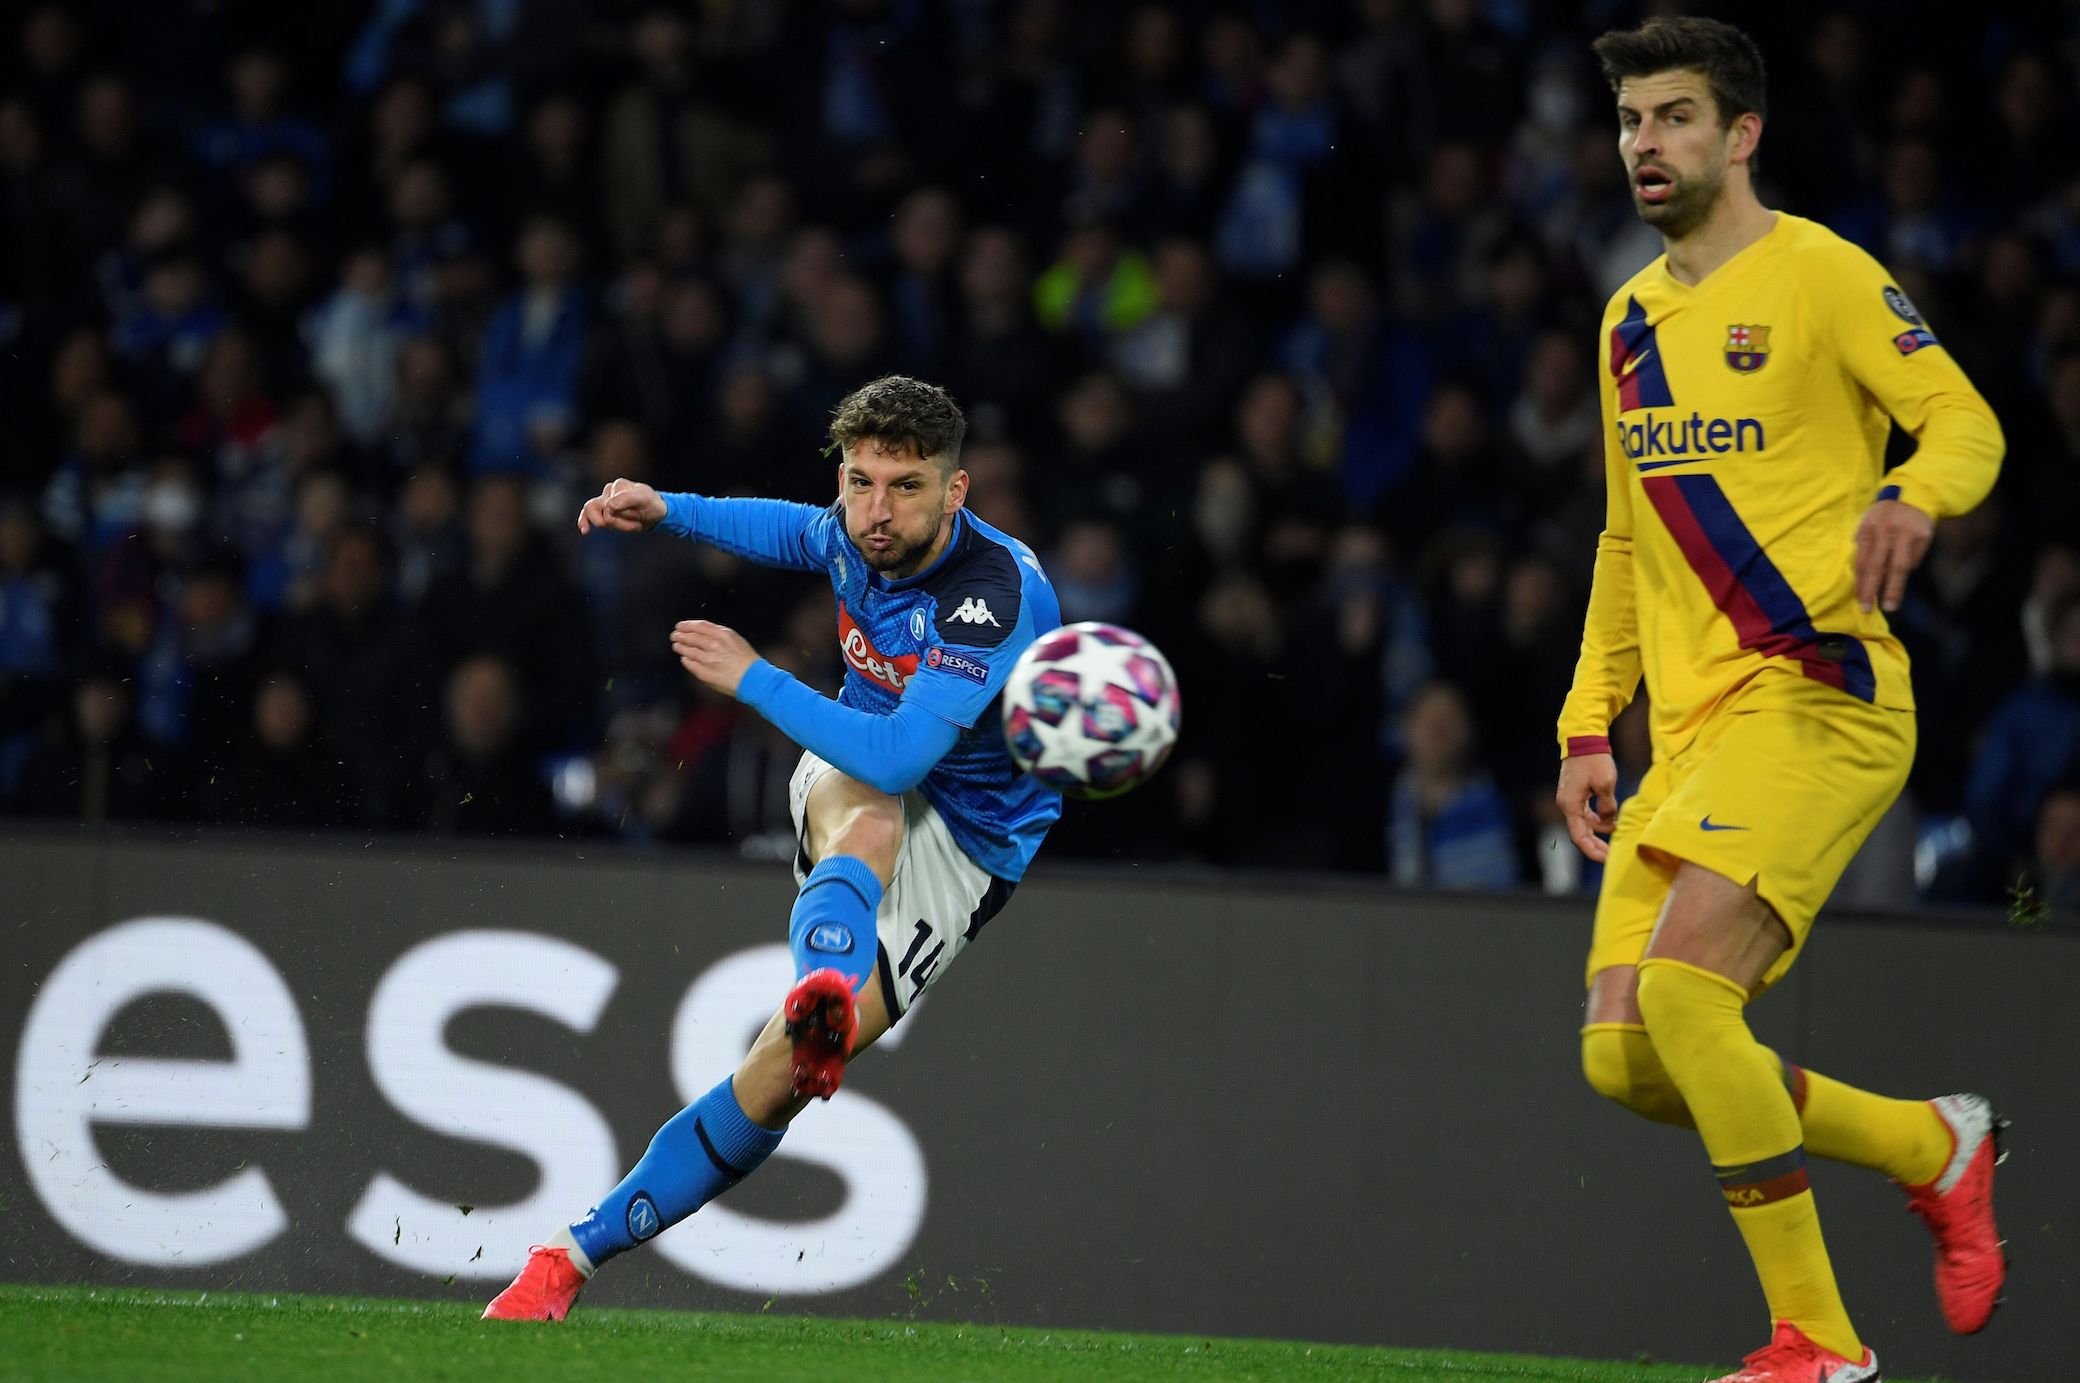 TOPSHOT - Napoli's Belgian forward Dries Mertens shoots the ball  during the UEFA Champions League round of 16 first-leg football match between SSC Napoli and FC Barcelona at the San Paolo Stadium in Naples on February 25, 2020. (Photo by Filippo MONTEFORTE / AFP) (Photo by FILIPPO MONTEFORTE/AFP via Getty Images)